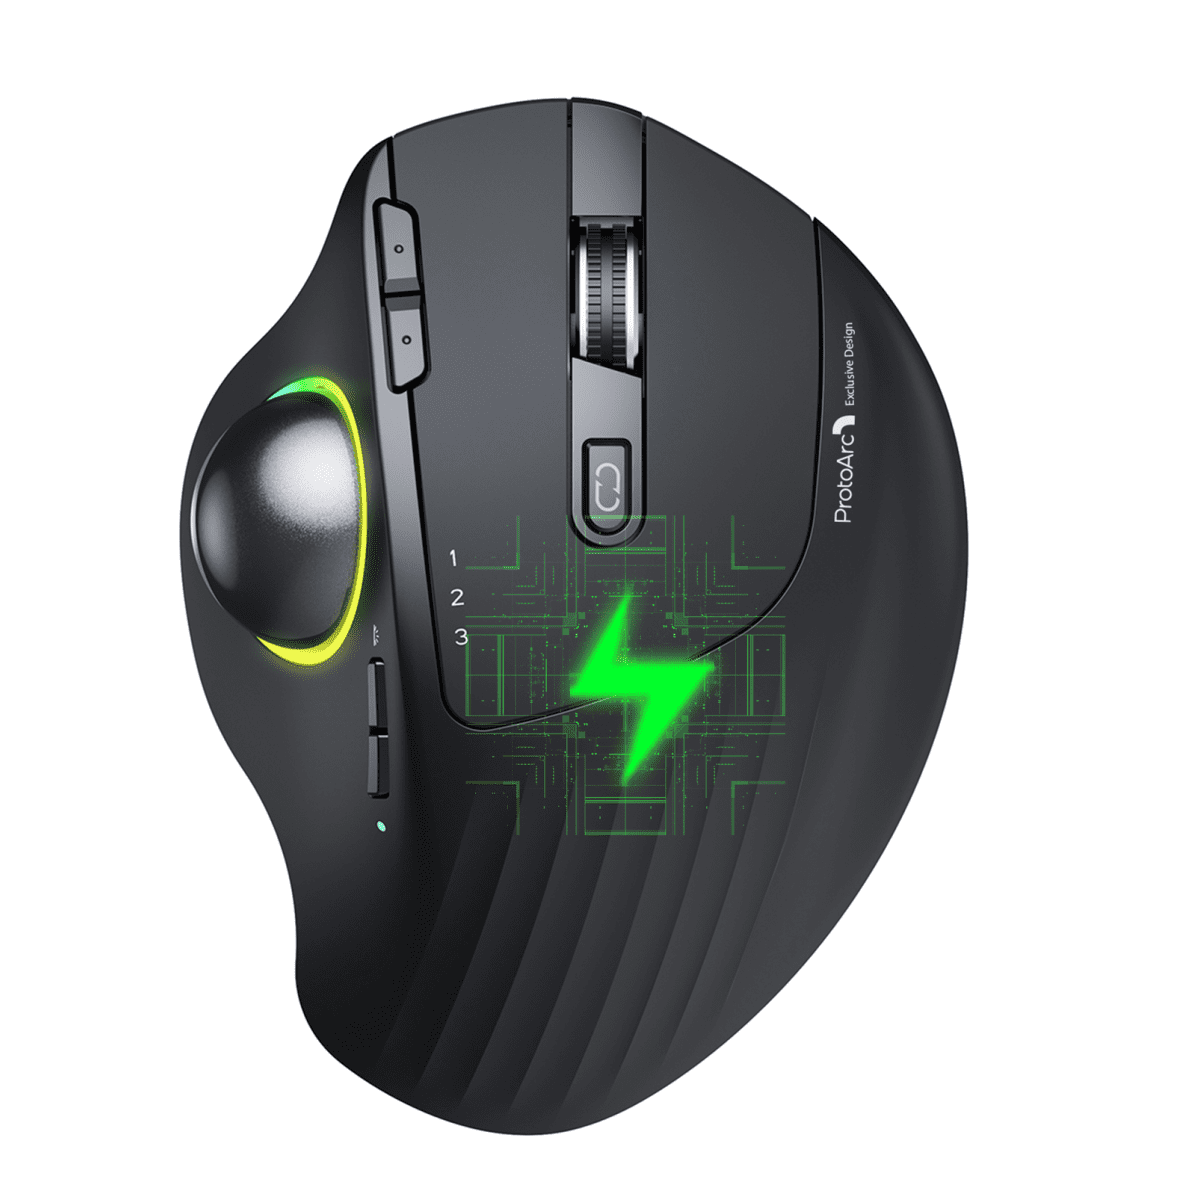 RGB Wireless Trackball Mouse, ProtoArc 2.4G Bluetooth Ergonomic  Rechargeable Rollerball Mice with 3 Adjustable DPI, 3 Device  Connection&Thumb Control, Compatible for PC, Mac, Windows-Black 